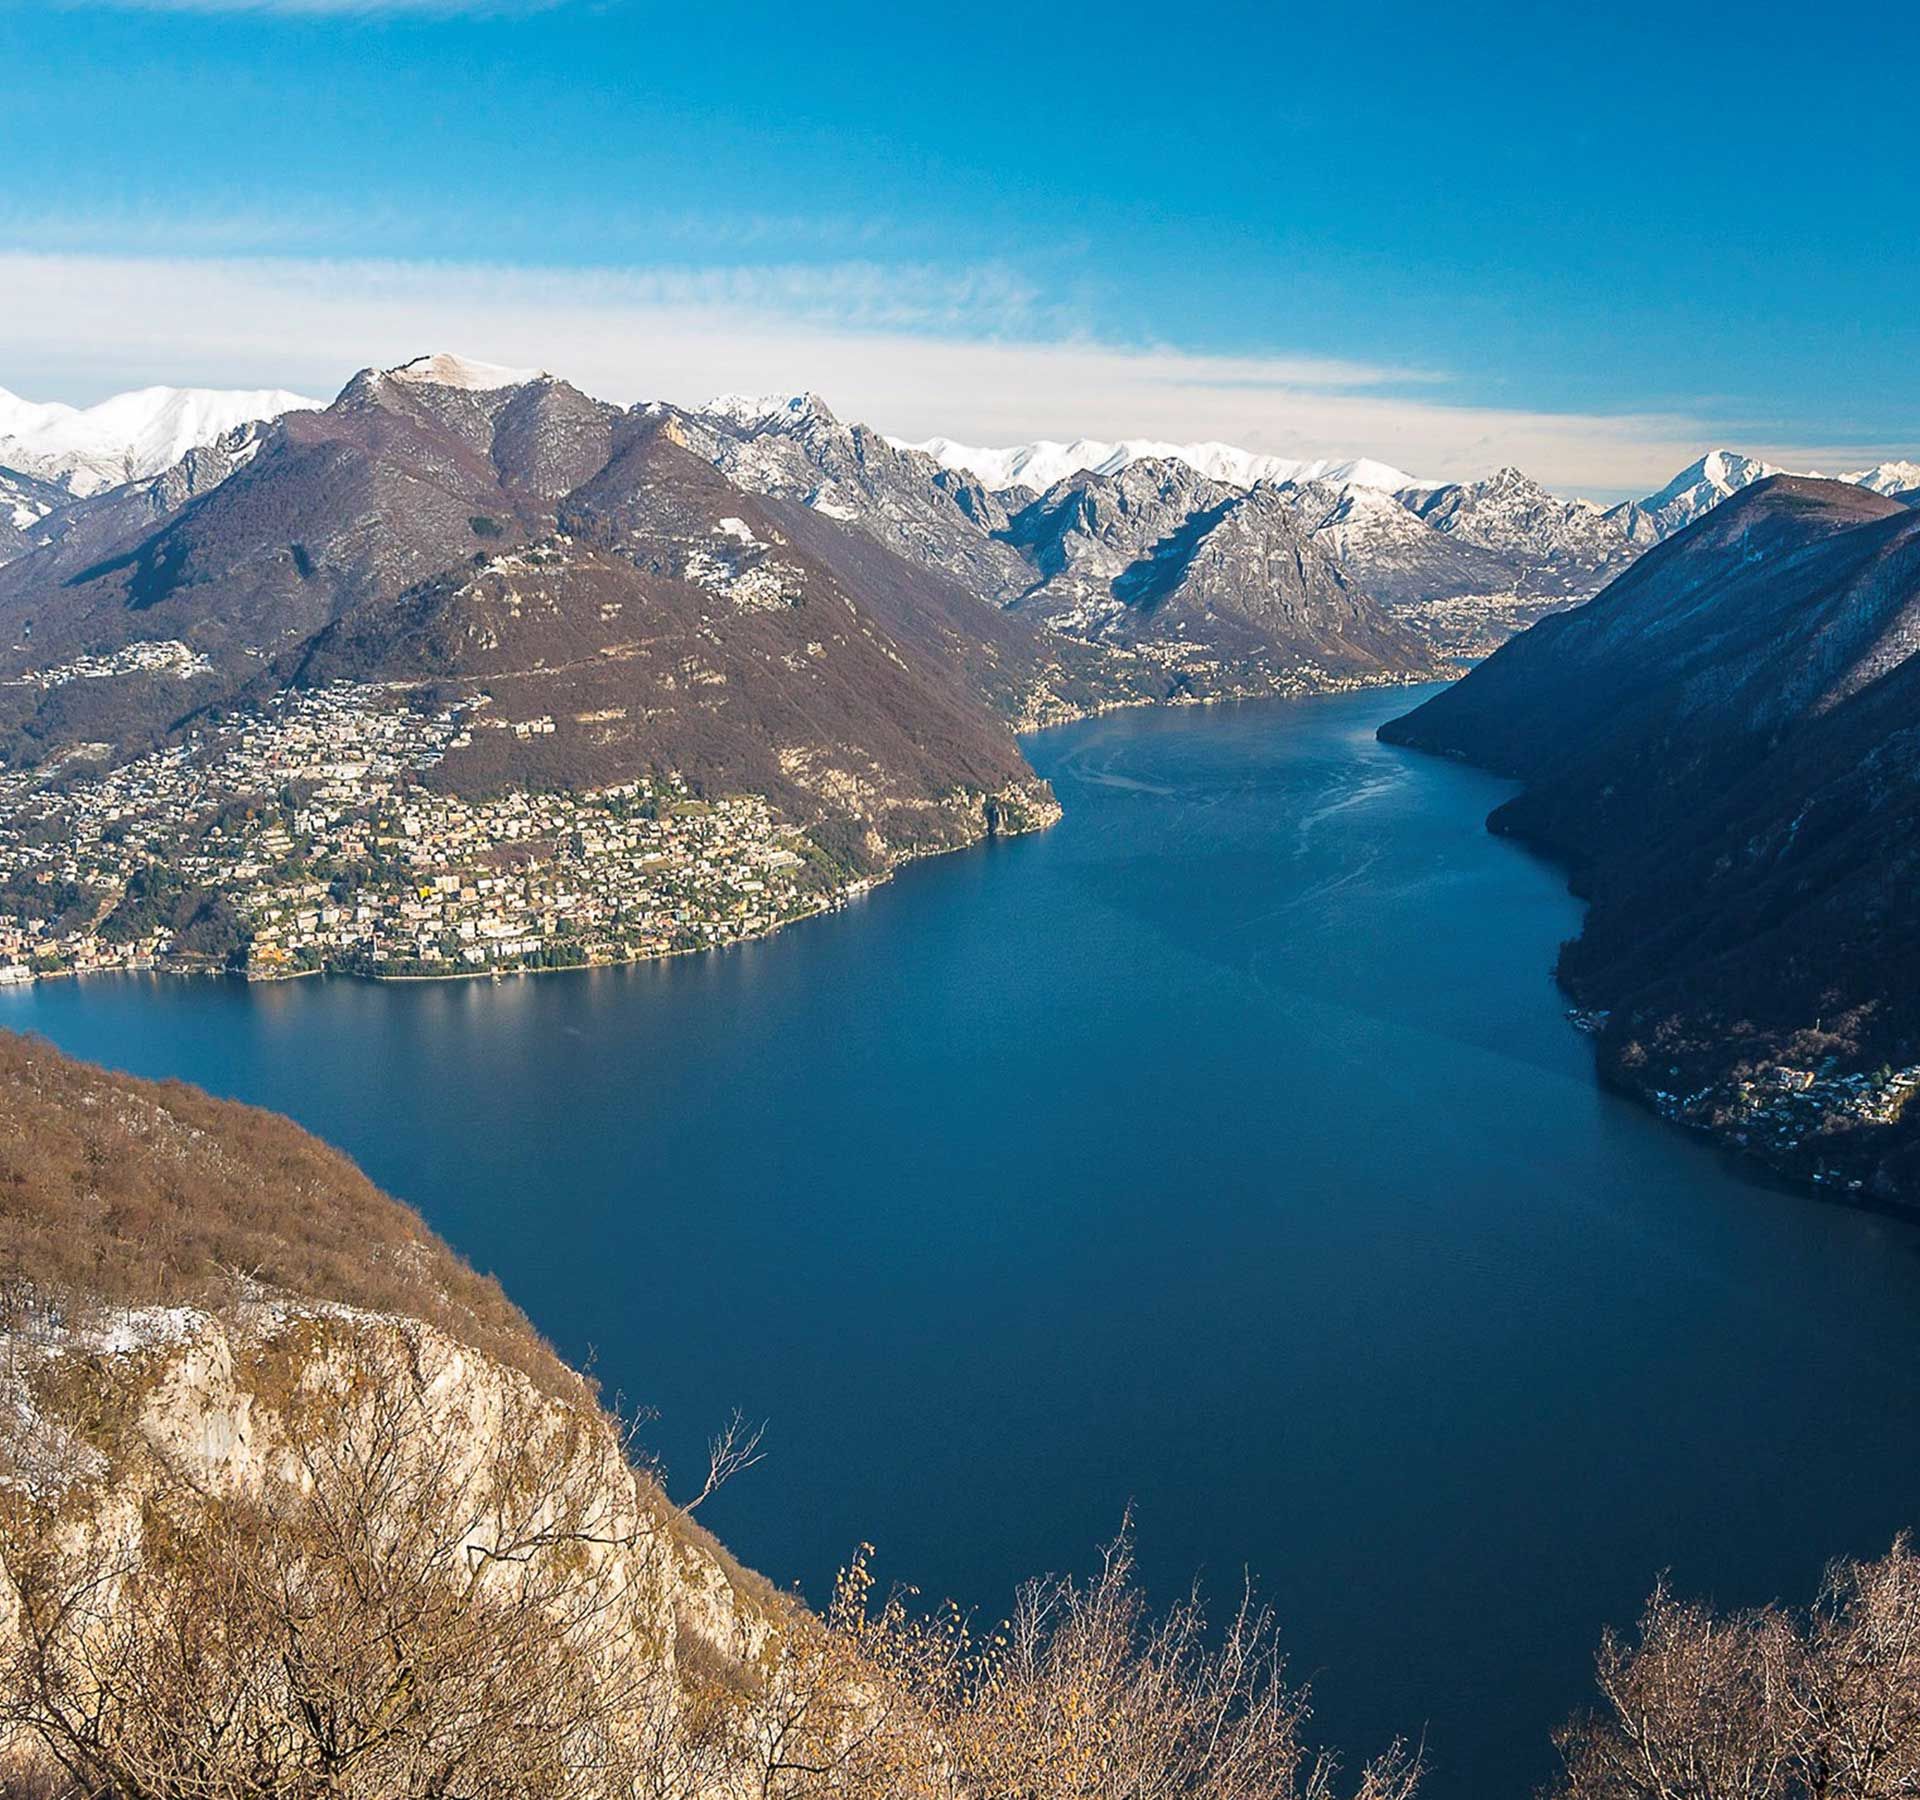 Aerial view of Monte San Salvatore in winter with lightly snow-covered mountains and a view of the deep blue Laggio Maggiore.